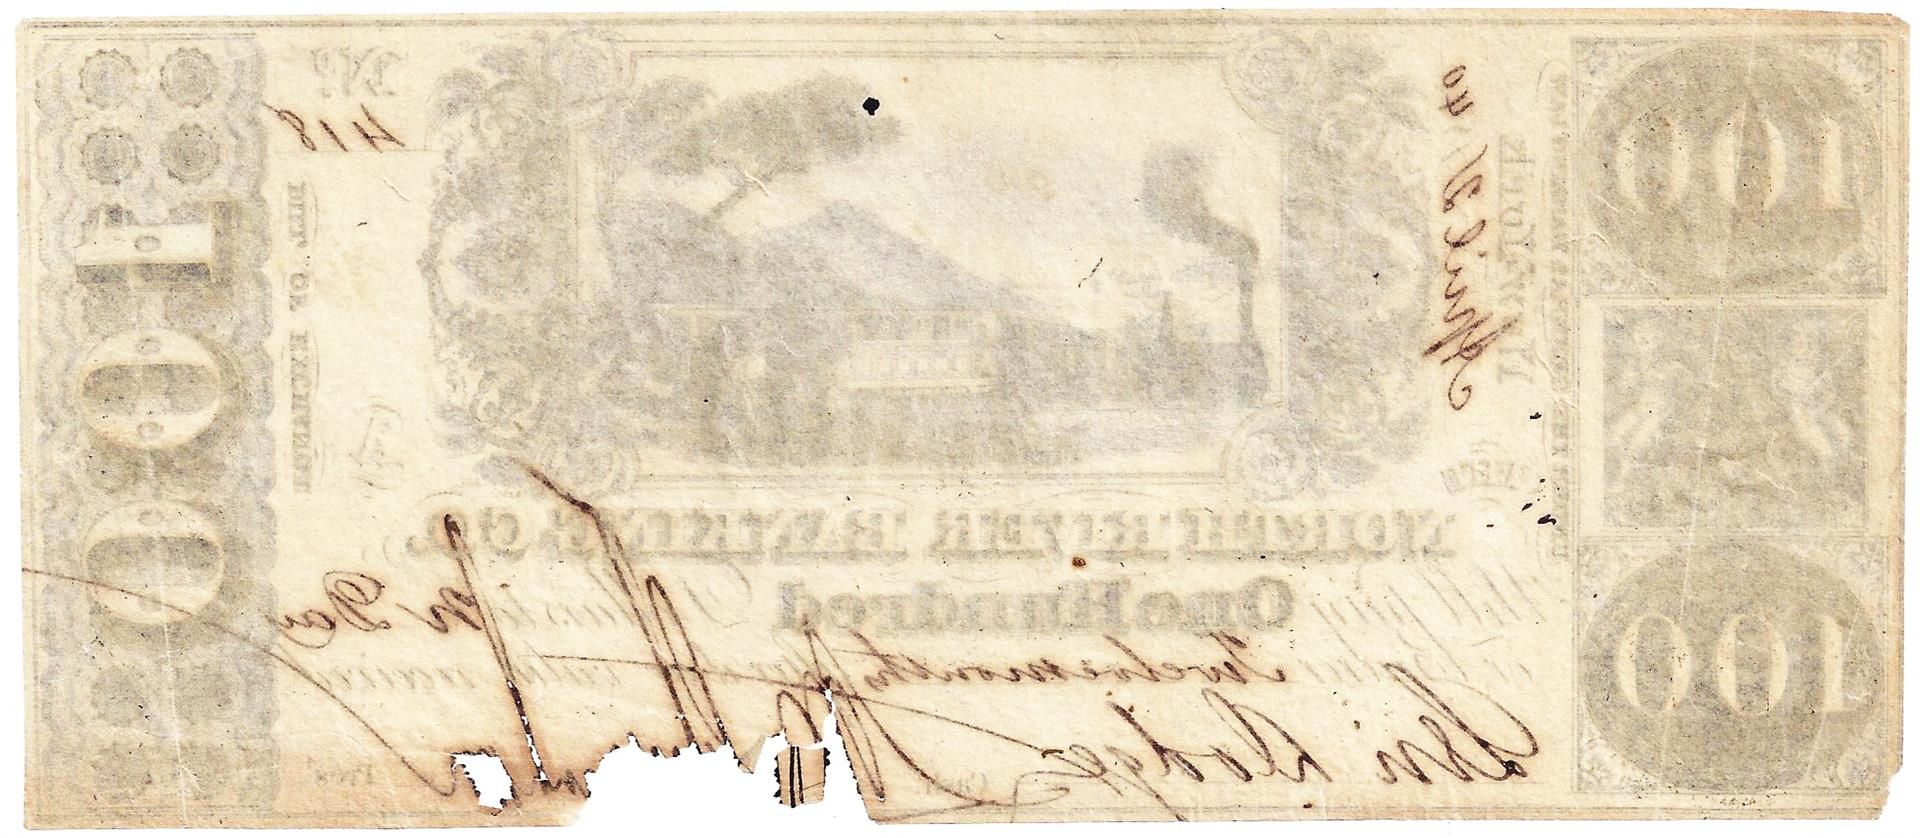 1850 $100 North River Banking Co, NY Obsolete Note - Image 2 of 2